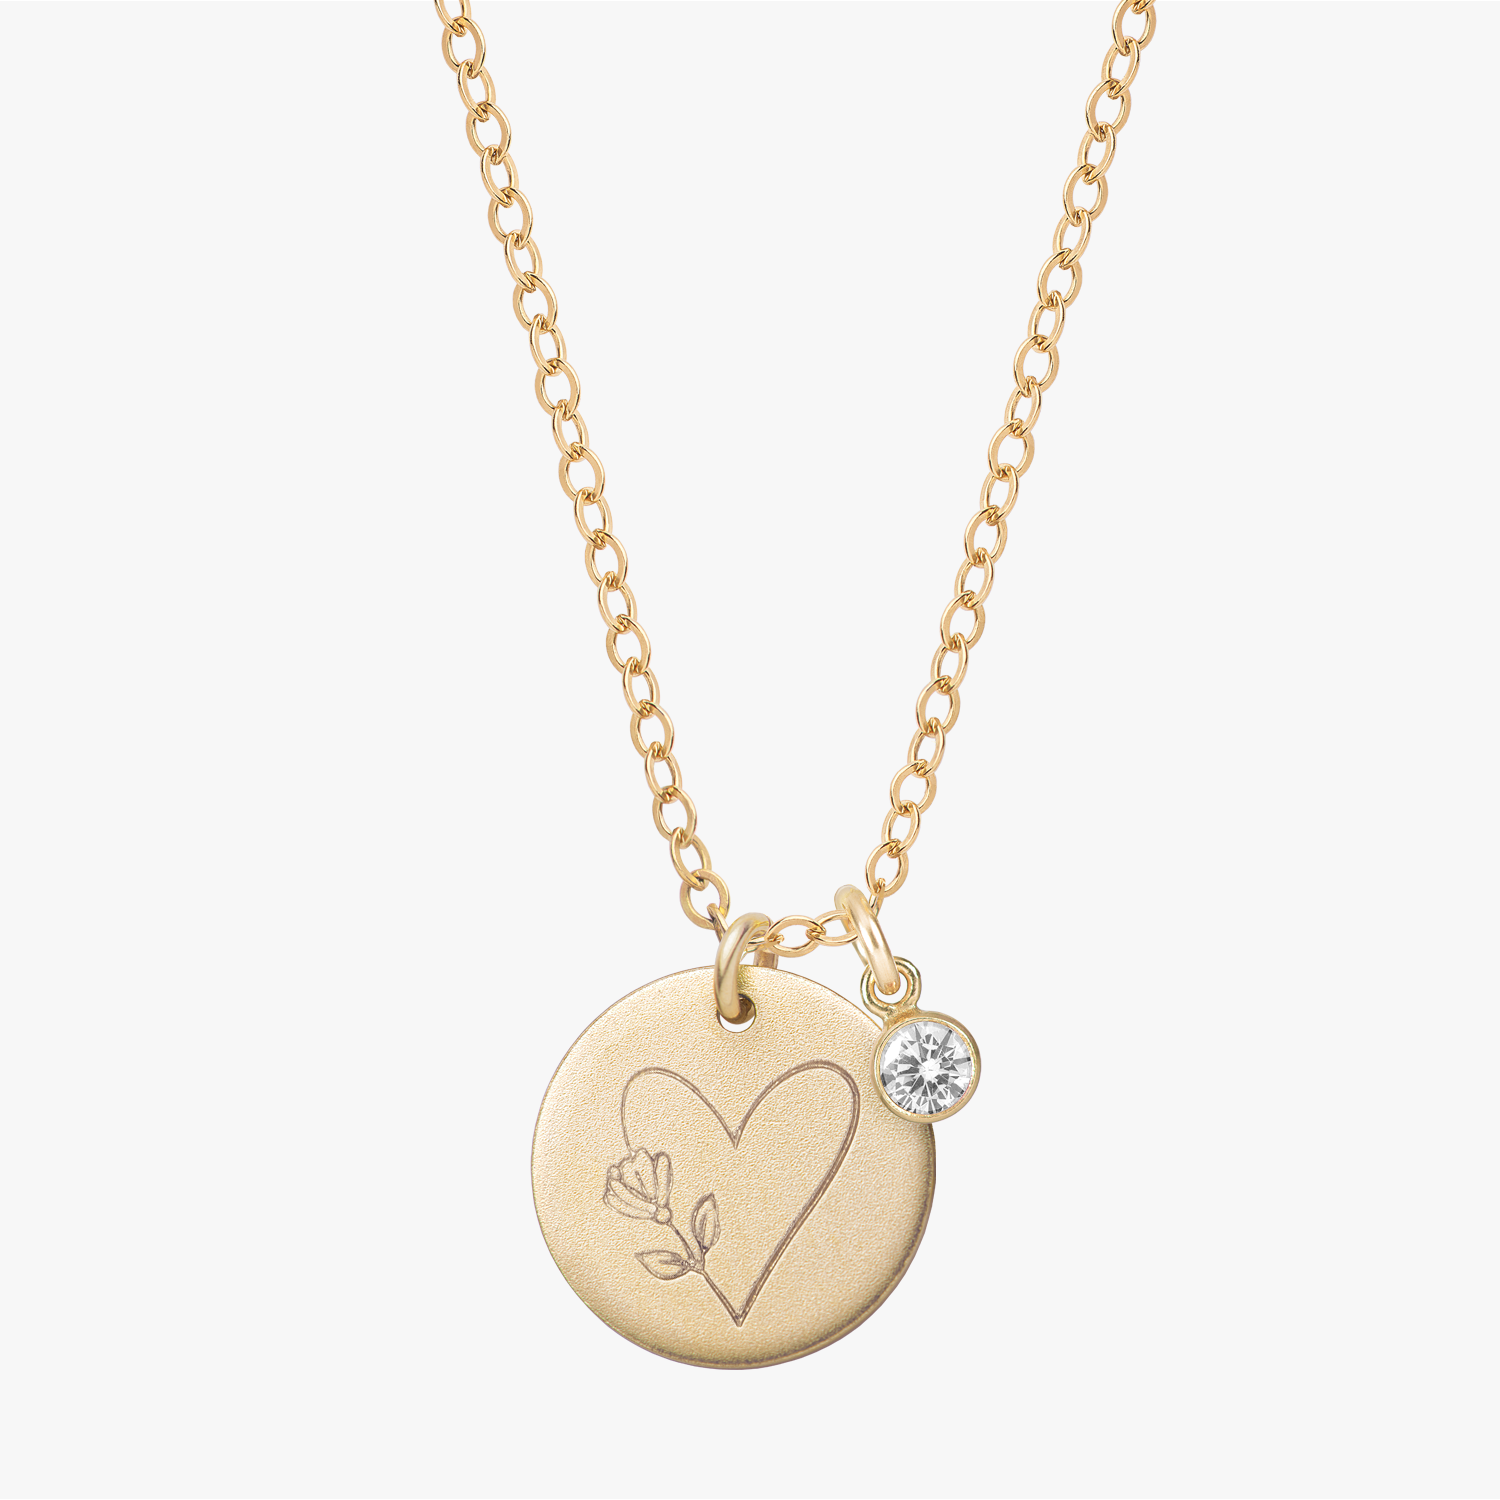 Personalized EmbraceYou Gold Necklace